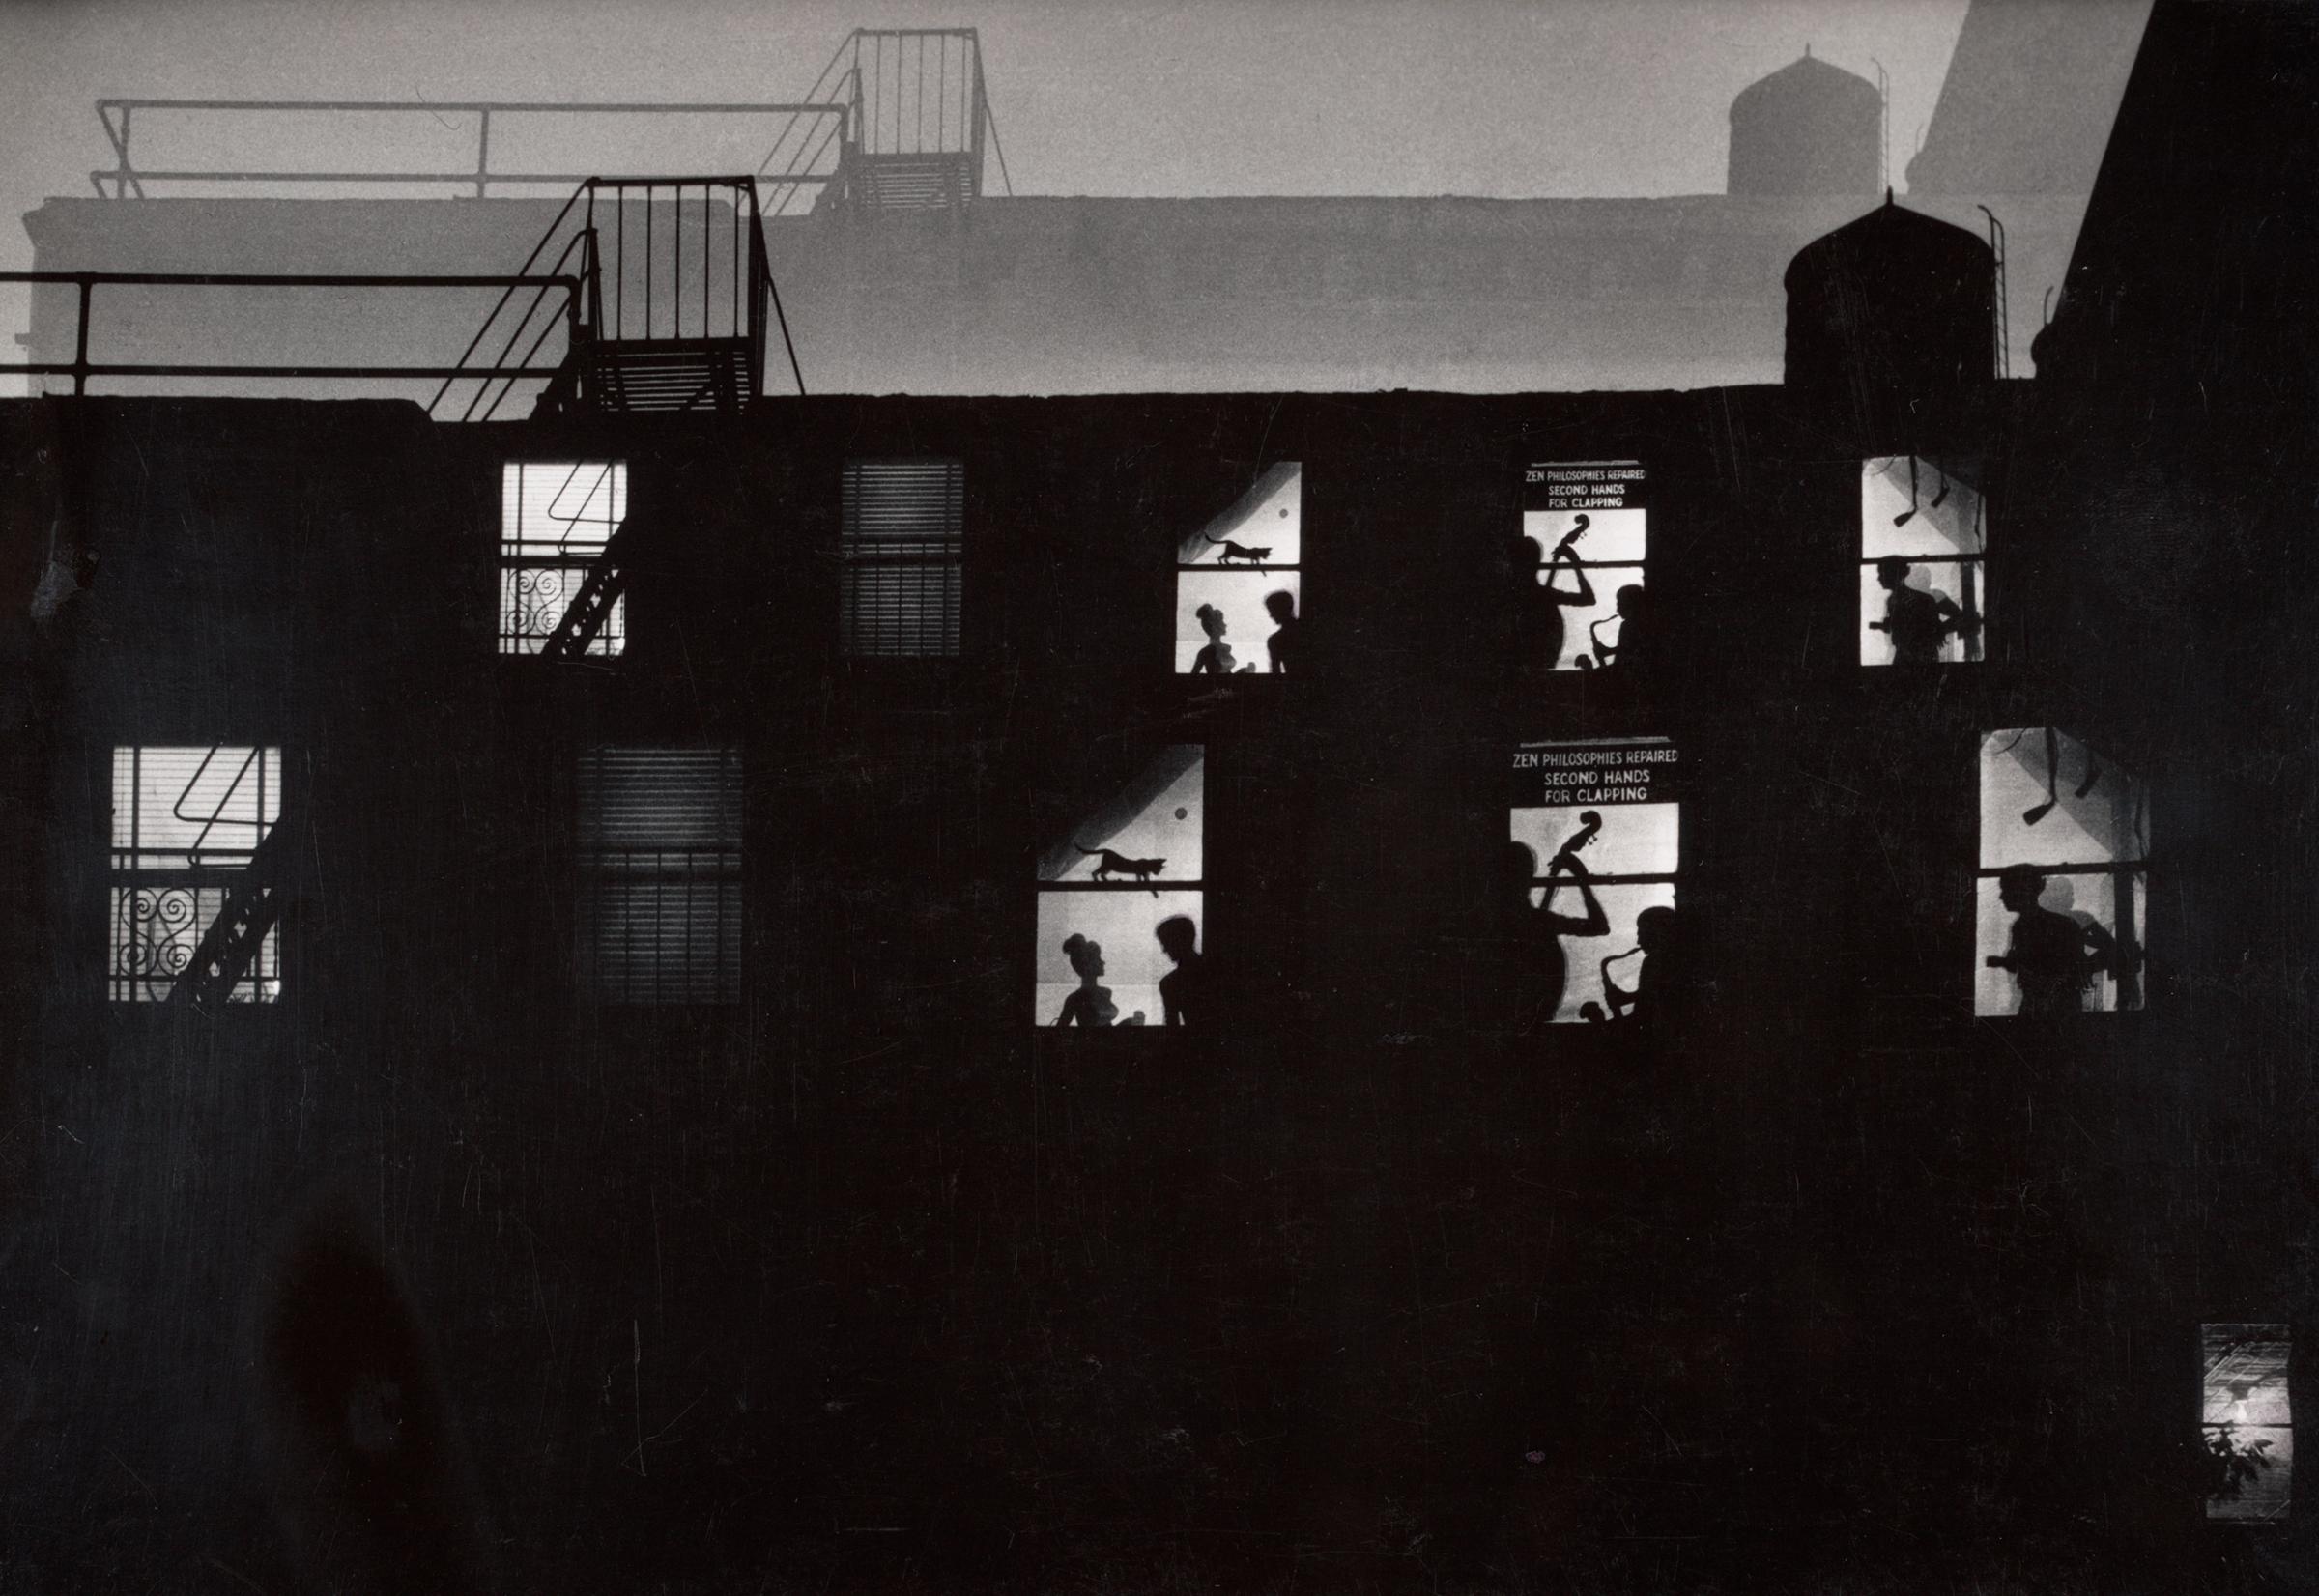 An experimental loft photo with added cut-out silhouettes in the windows.